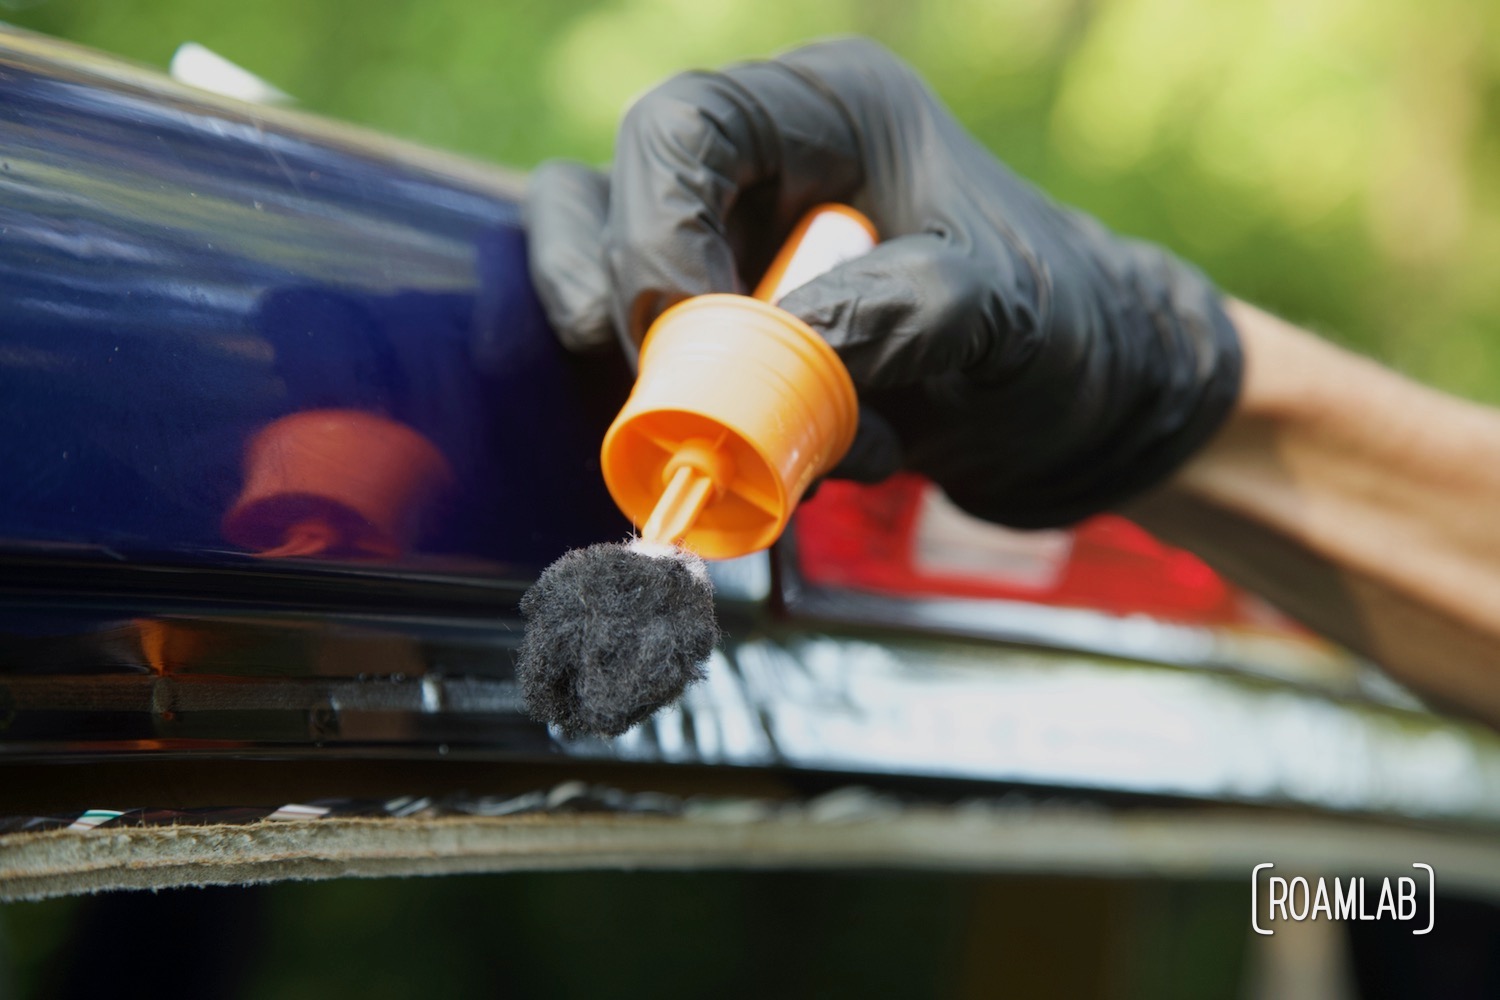 Gloved hand using an orange dauber to apply black automative glass primer on the blue truck frame.